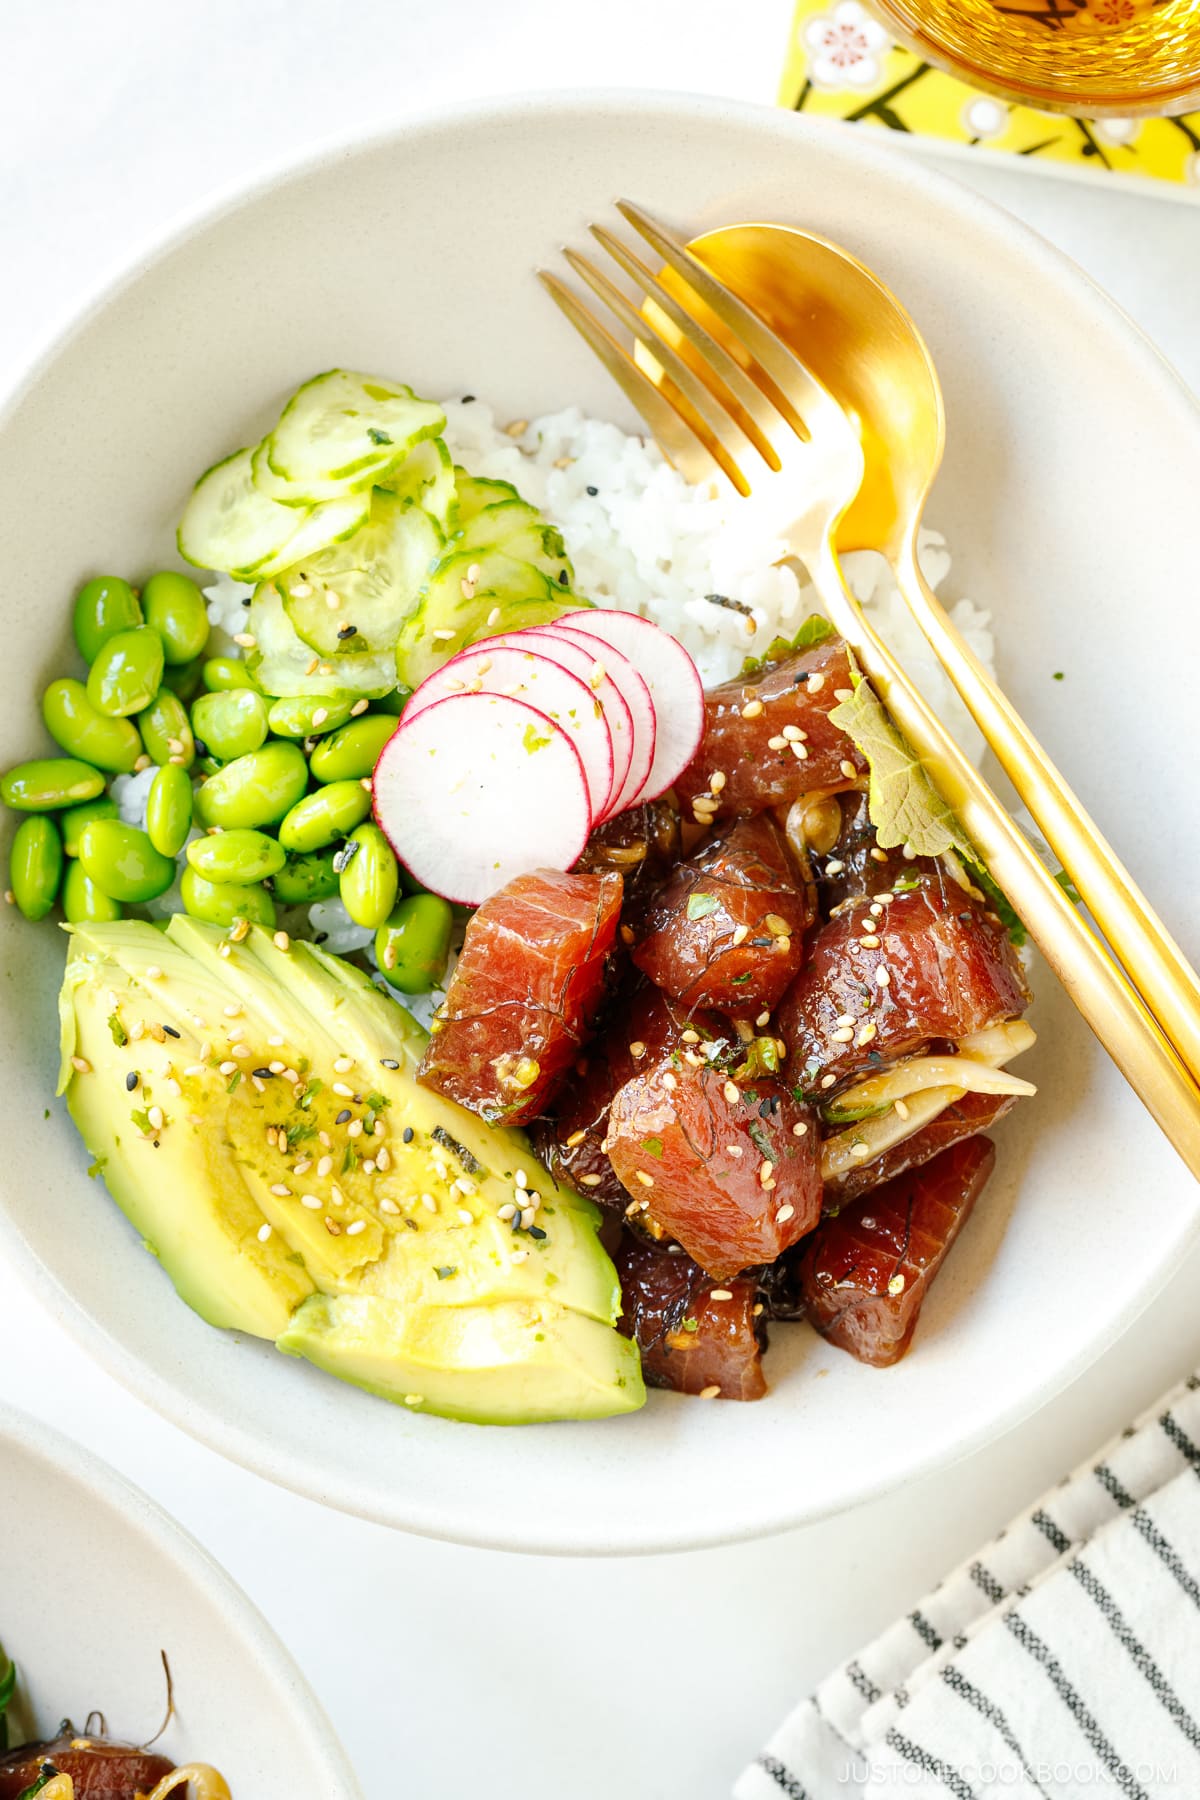 Ahi Tuna Poke Bowl containing soy marinated raw tuna, avocado slices, edamame, and cucumber slices over a bed of steamed rice.